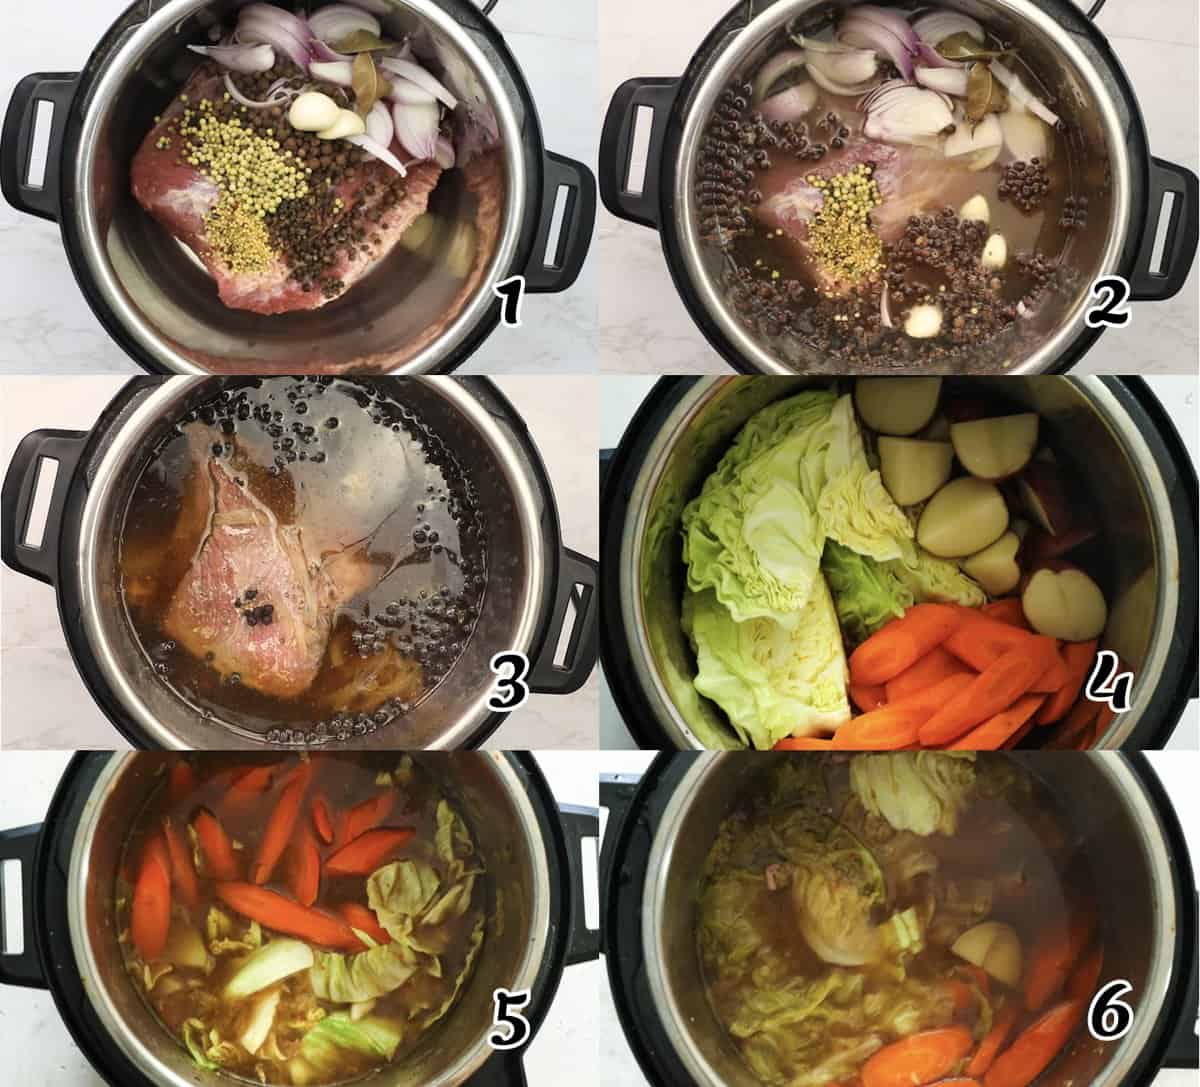 Pressure cook the meat, then cook your veggies